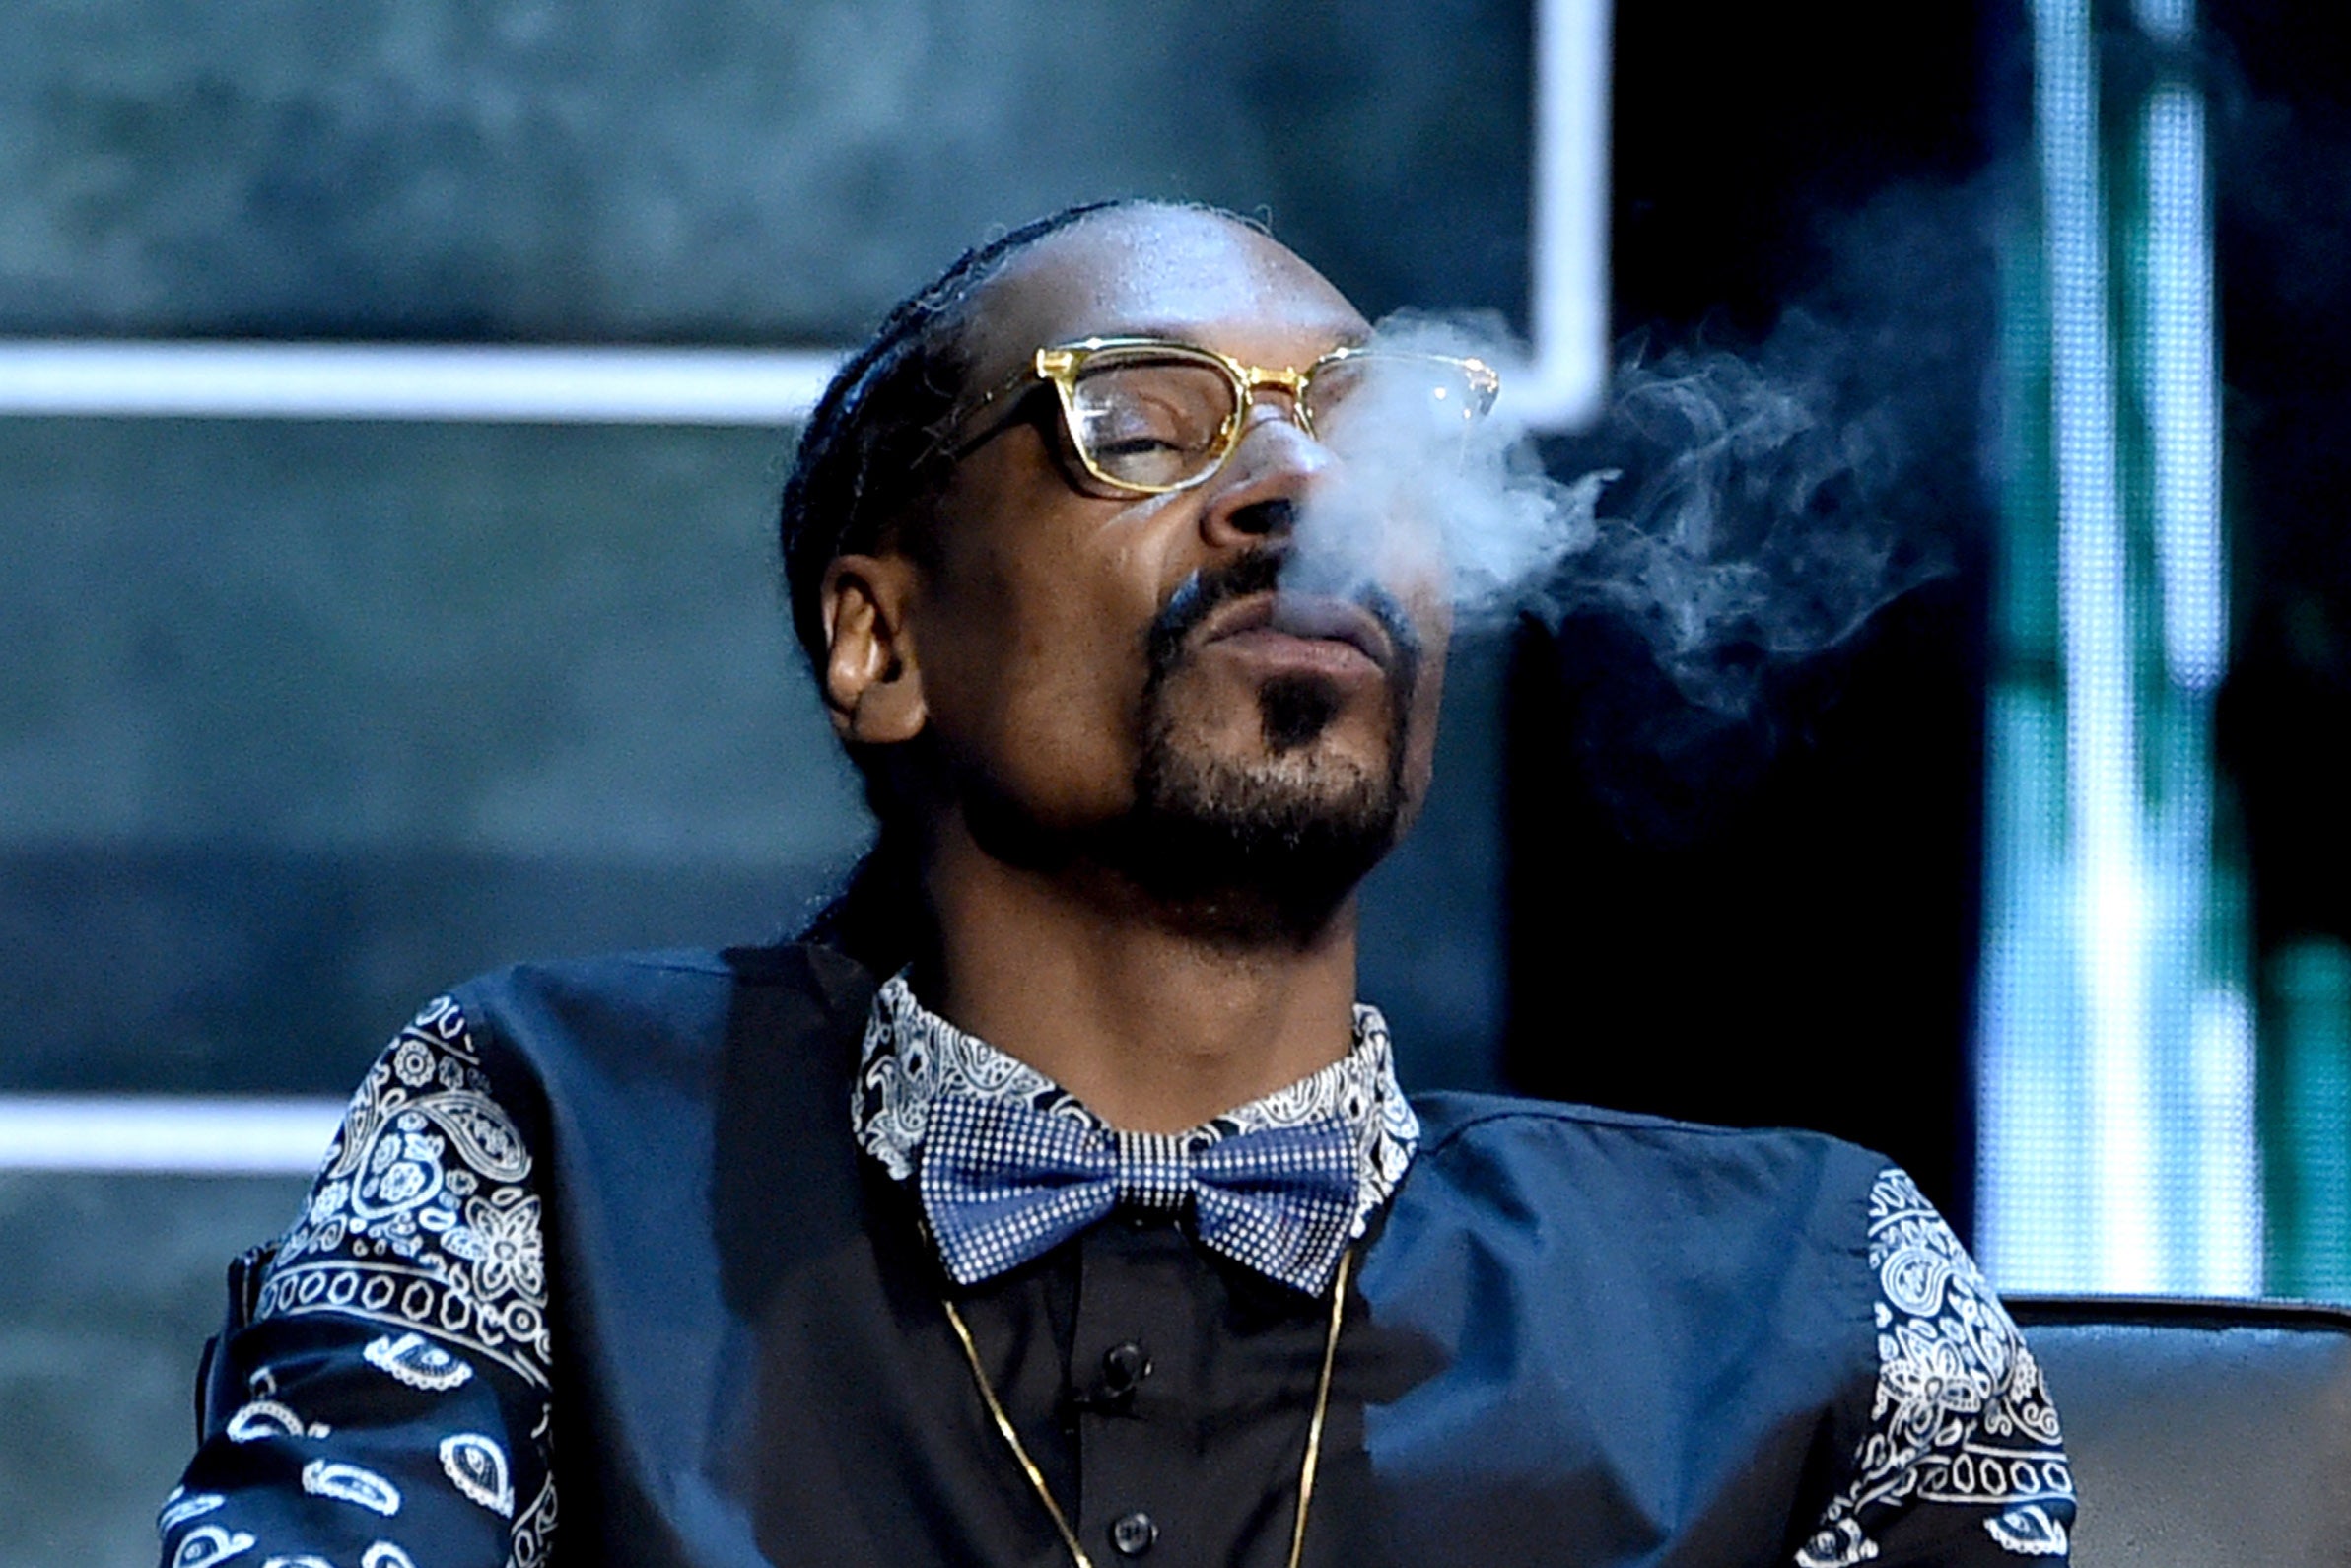 Rapper Snoop Dogg has created a personal brand that’s synonymous with getting high